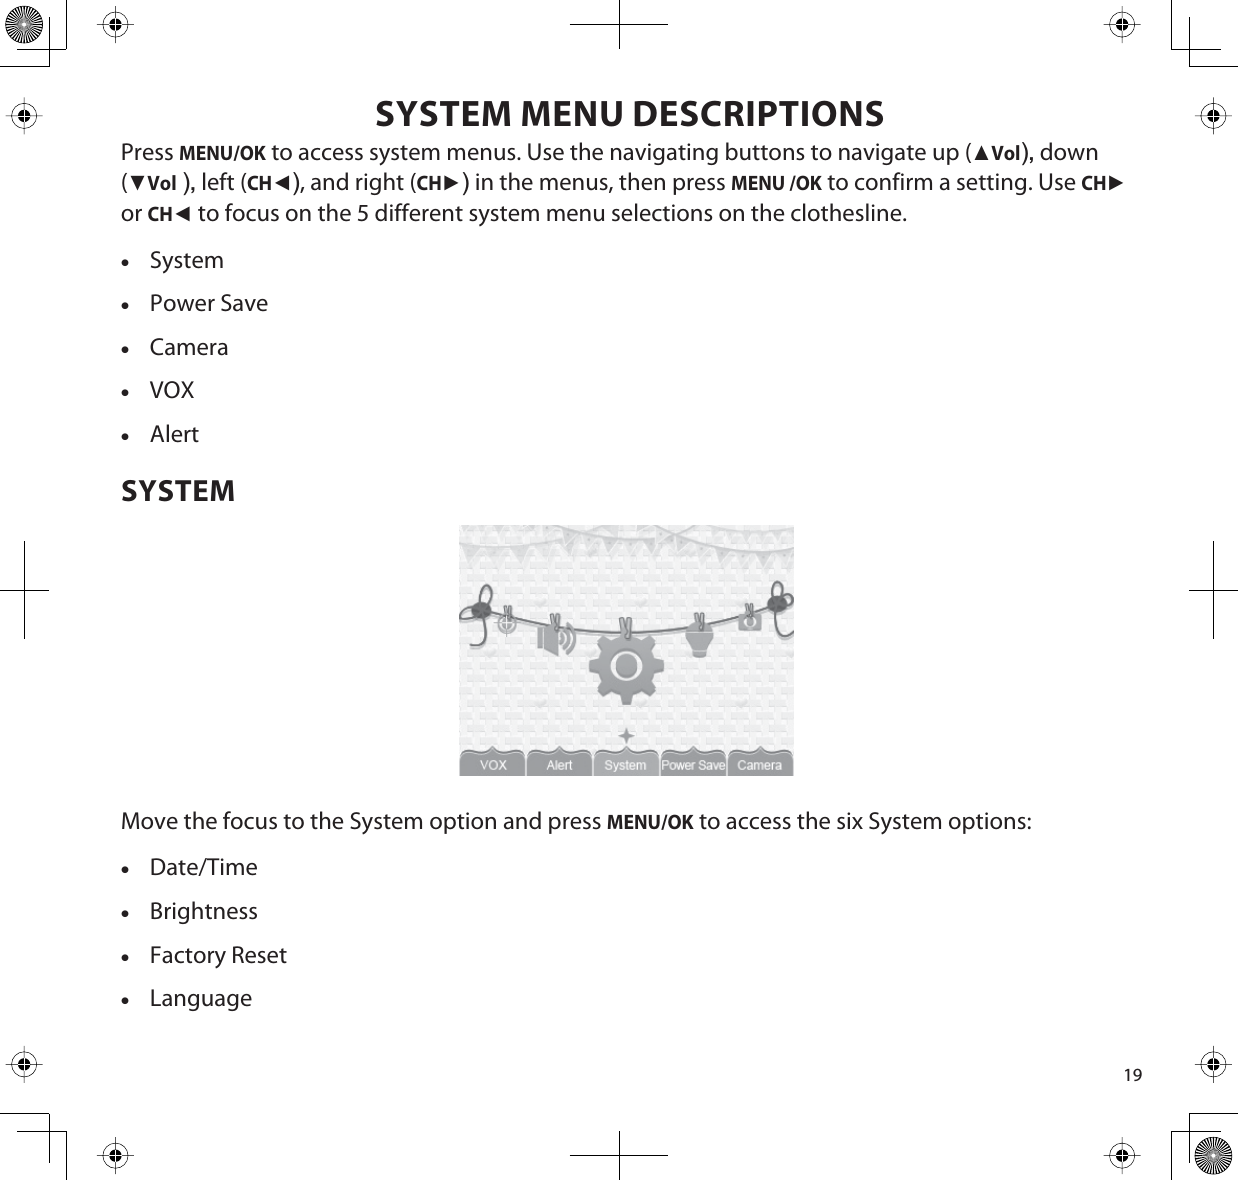 19SYSTEM MENU DESCRIPTIONSPressMENU/OK to access system menus. Use the navigating buttons to navigate up (ŸVol),down(źVol),left (CHŻ), and right (CHŹ) in the menus, then press MENU /OK to confirm a setting. Use CHŹorCHŻto focus on the 5 different system menu selections on the clothesline.xSystemxPower SavexCameraxVOXxAlertSYSTEMMove the focus to the System option and press MENU/OK to access the six System options:xDate/TimexBrightnessxFactory ResetxLanguage